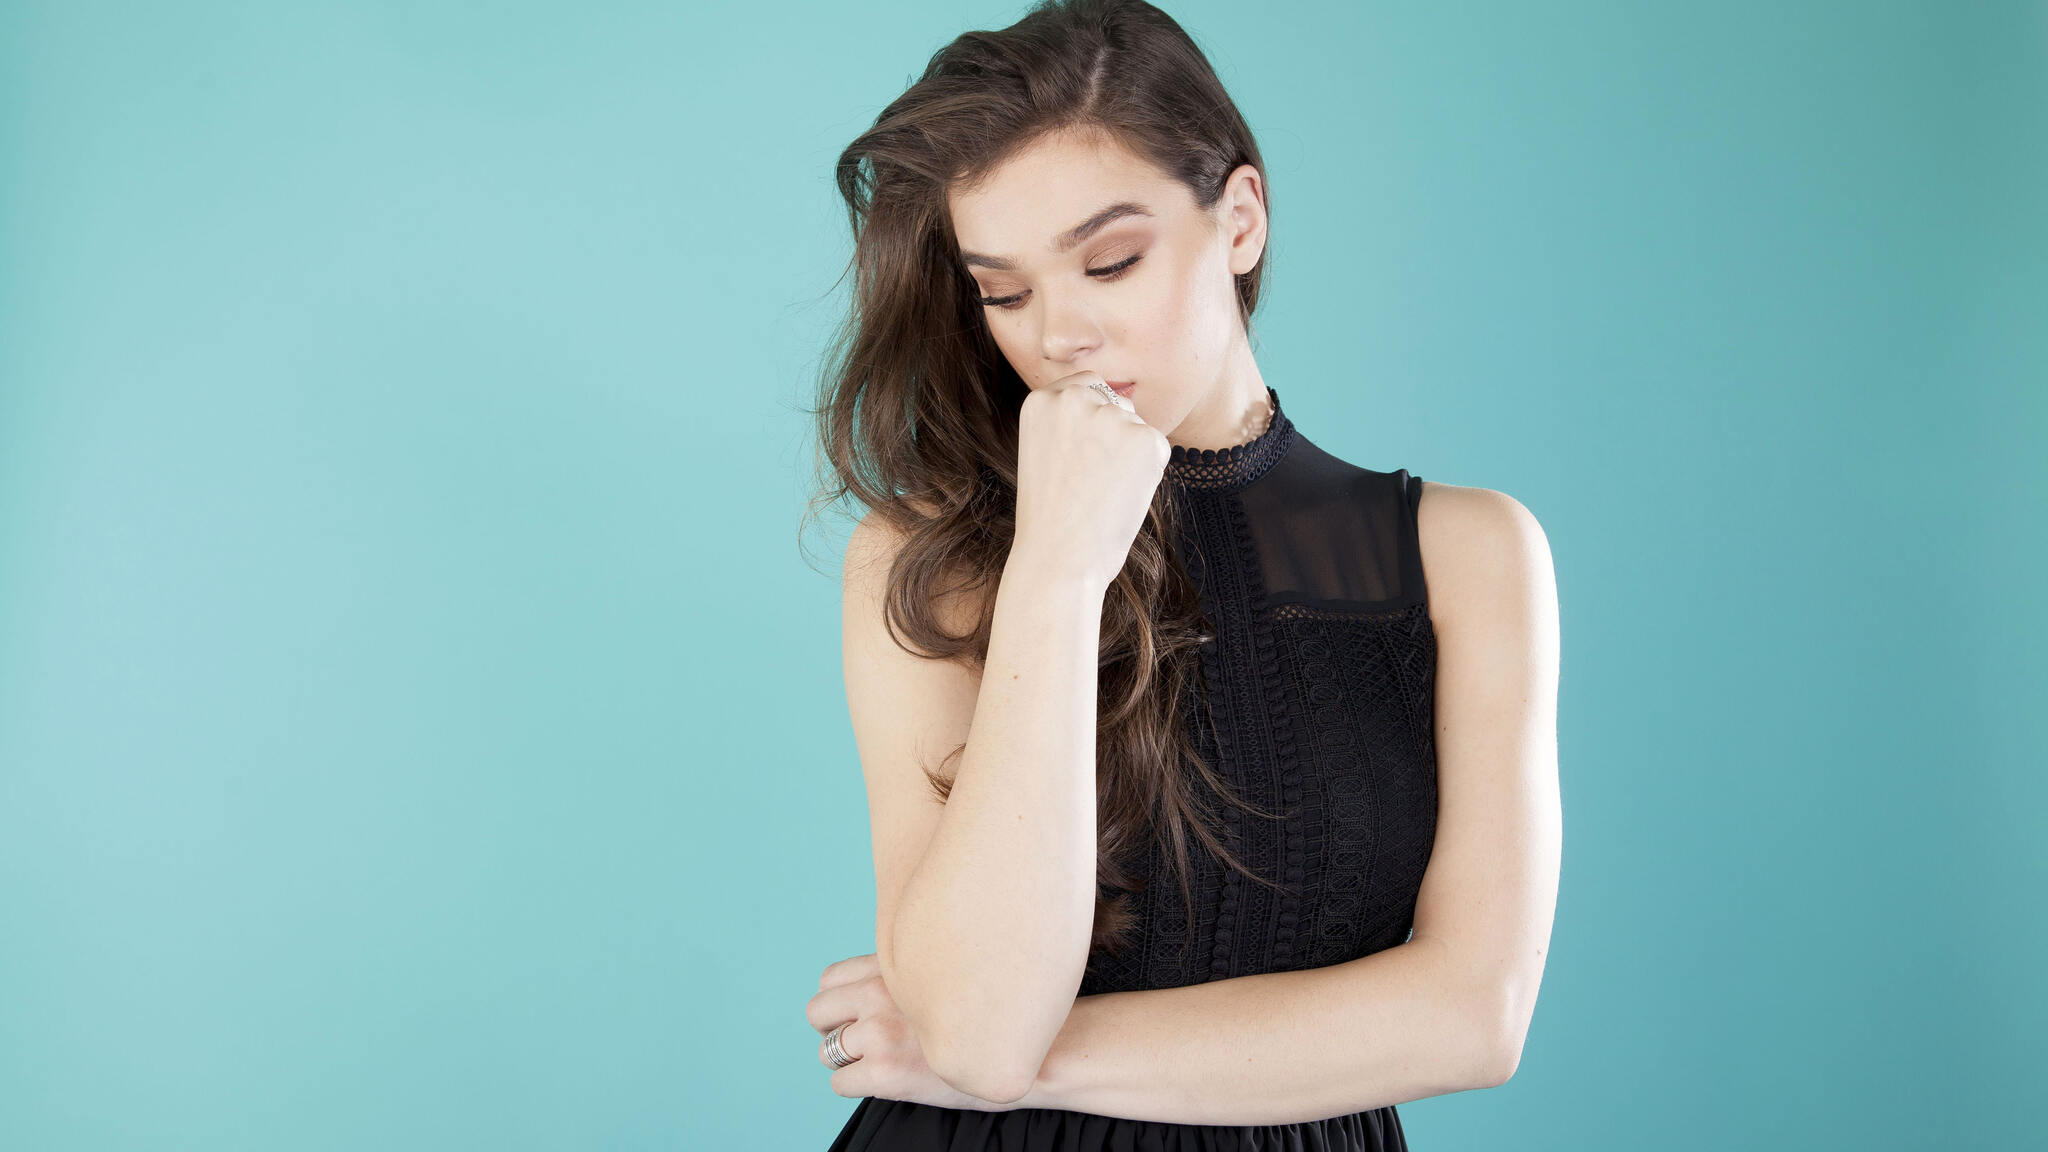 Hailee Steinfeld Alicia Canter Photoshoot In 2048x1152 Resolution. hailee-s...